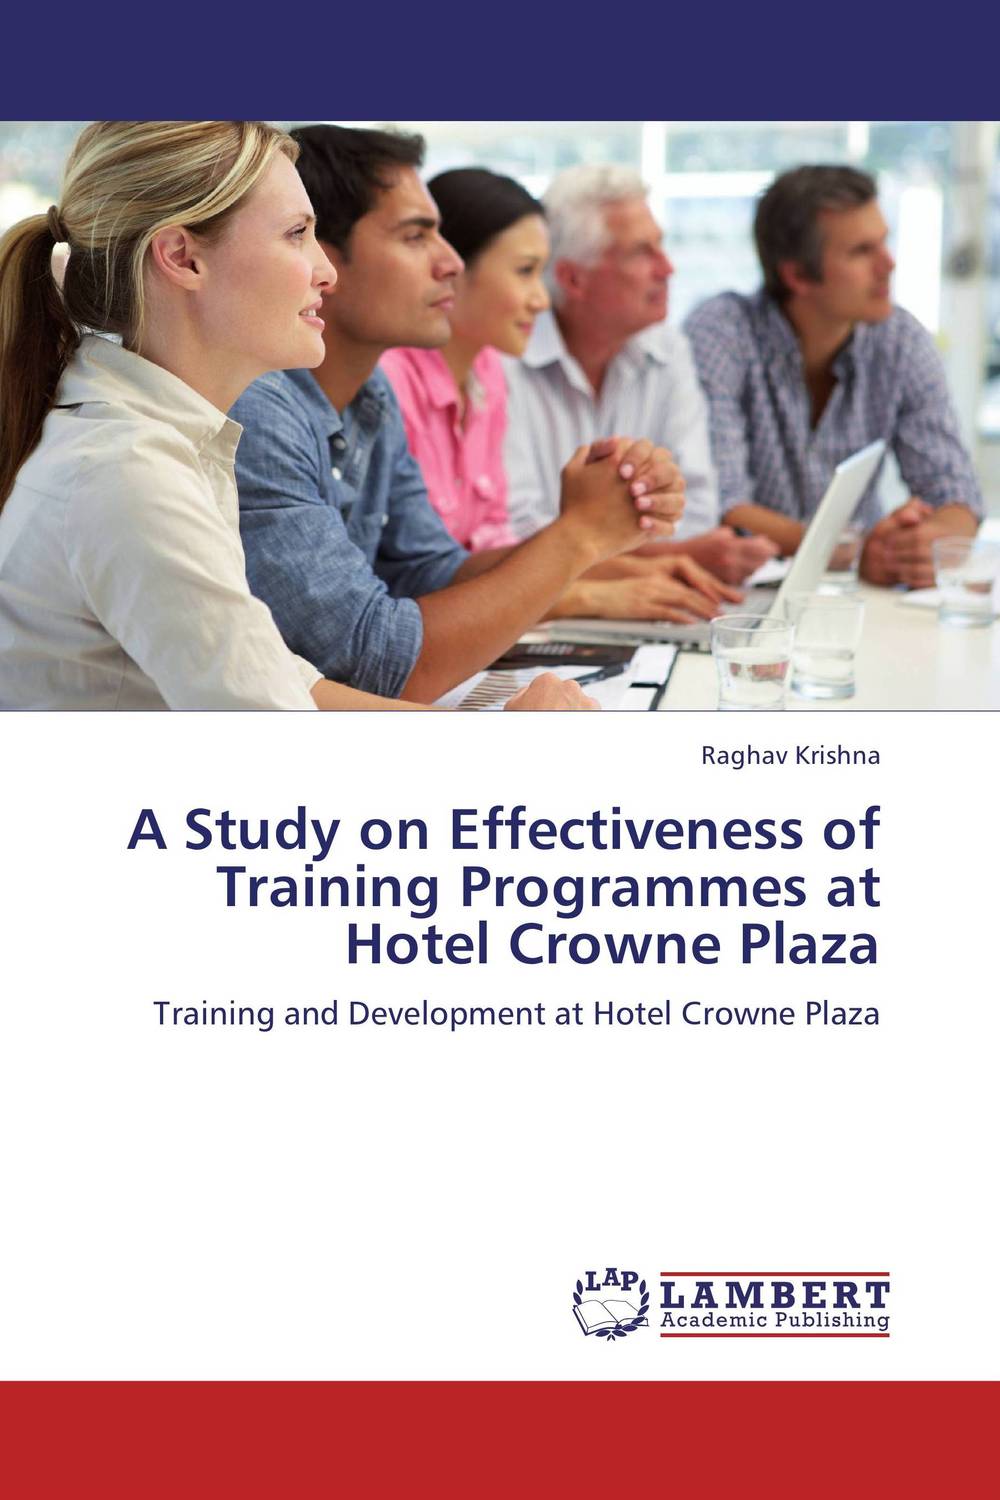 A Study on Effectiveness of Training Programmes at Hotel Crowne Plaza